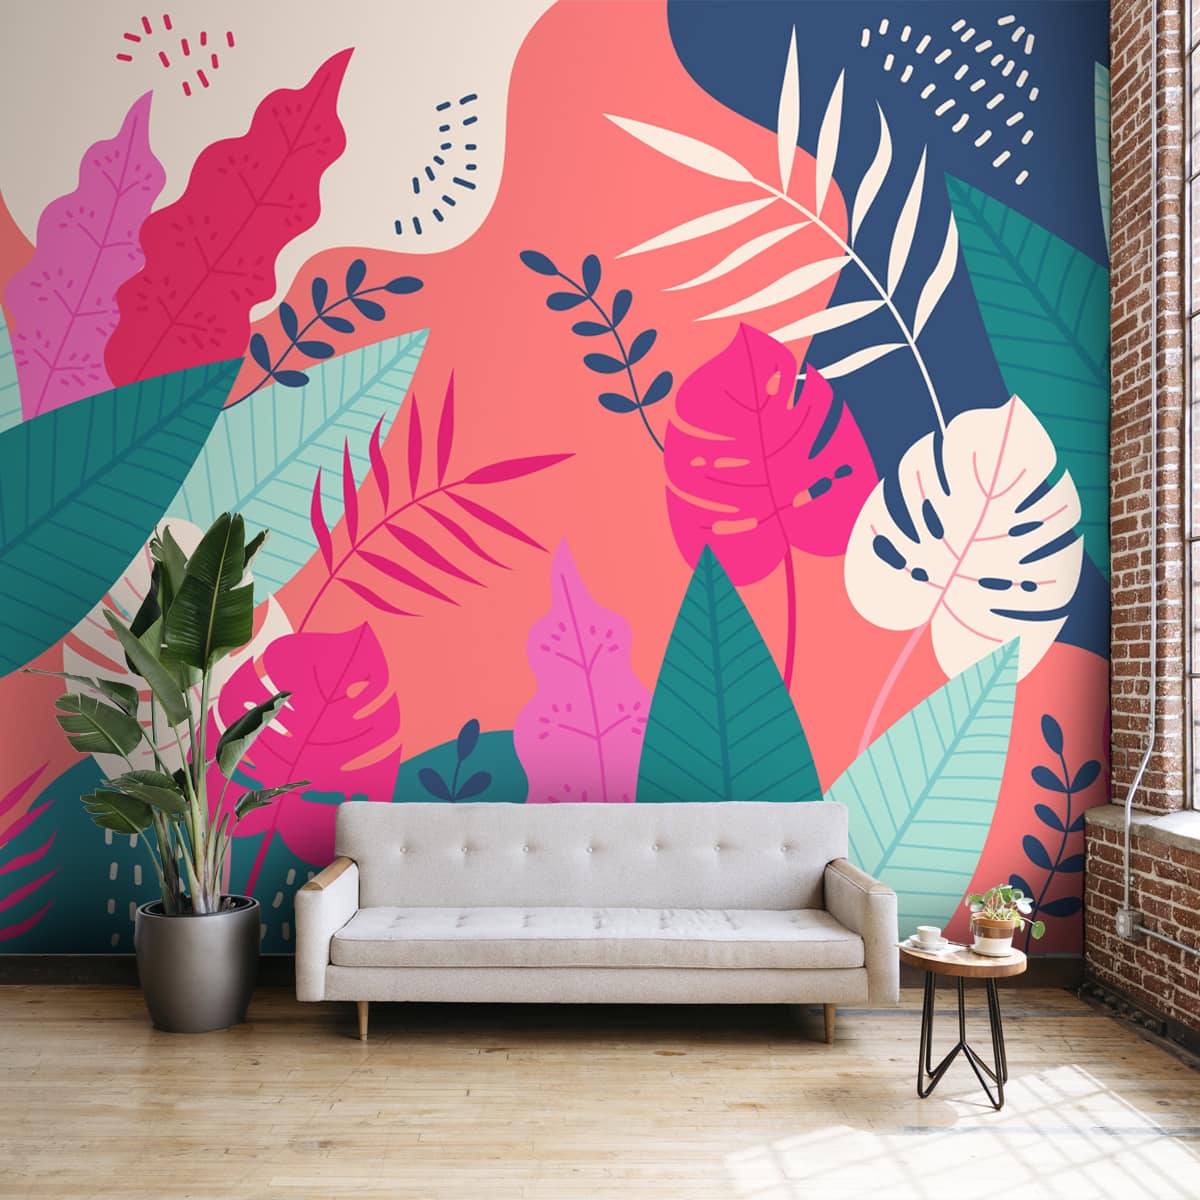 Quirky Colorful Tropical Leaves Wallpaper